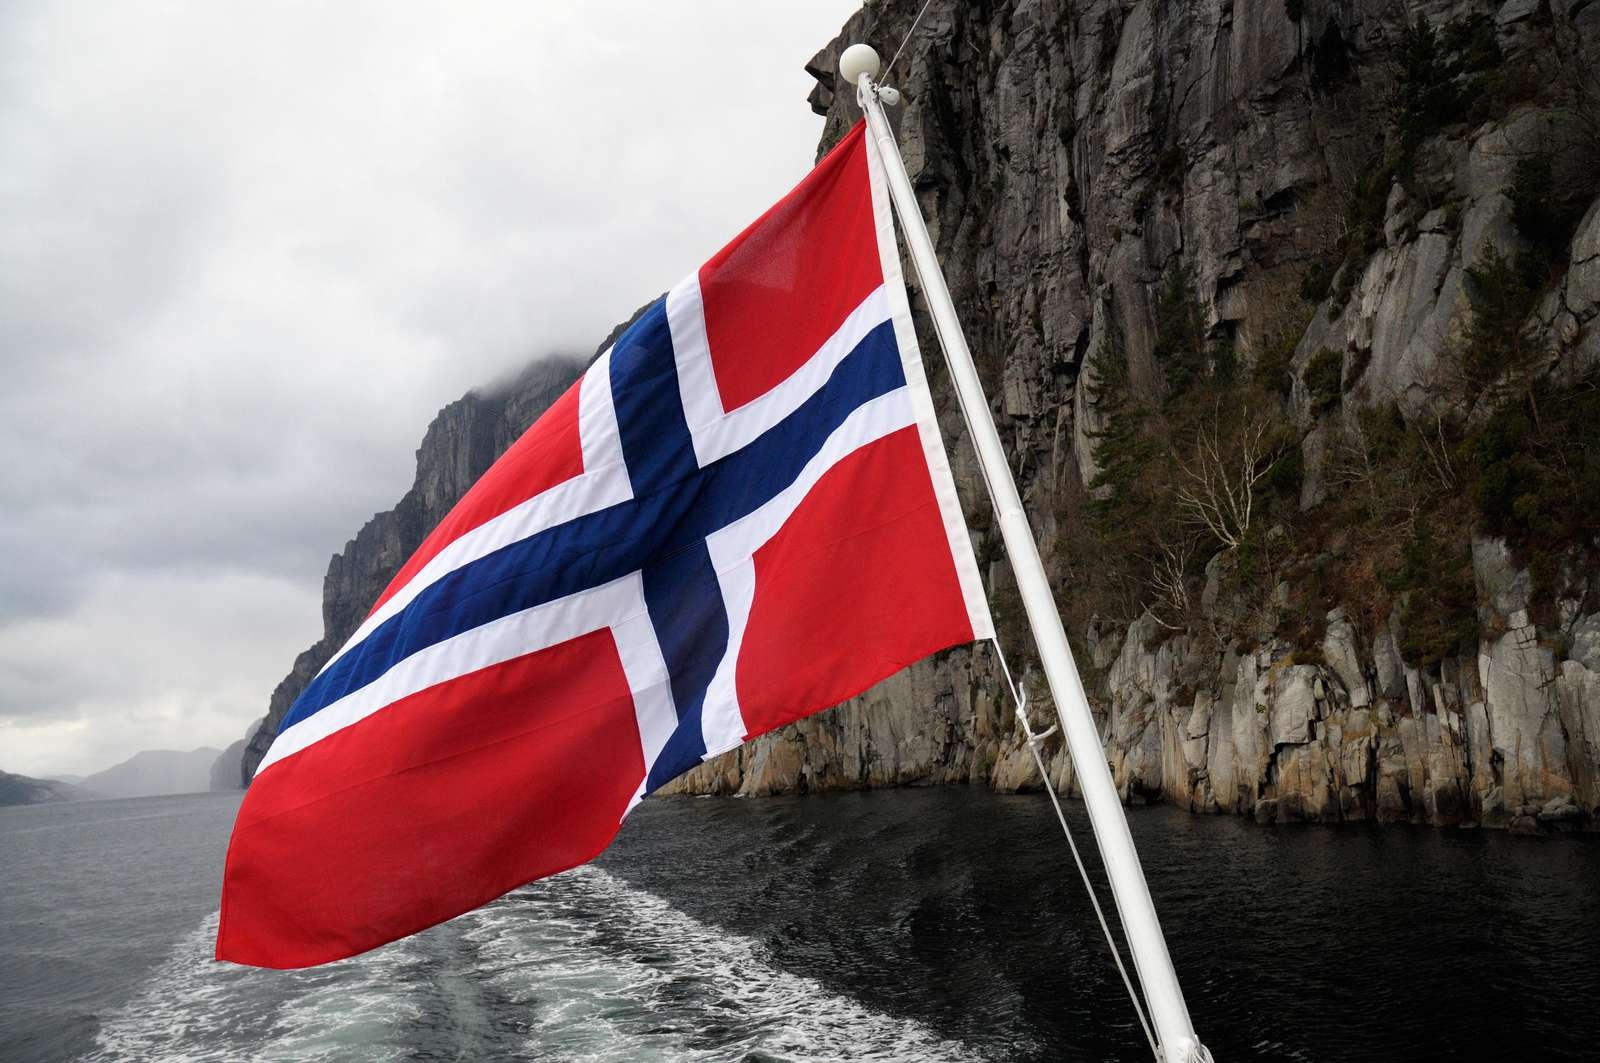 A boat is sailing with a Norwegian flag at the end of the boat. The rocks of Lysefjorden and a cloudy sky are in the background.